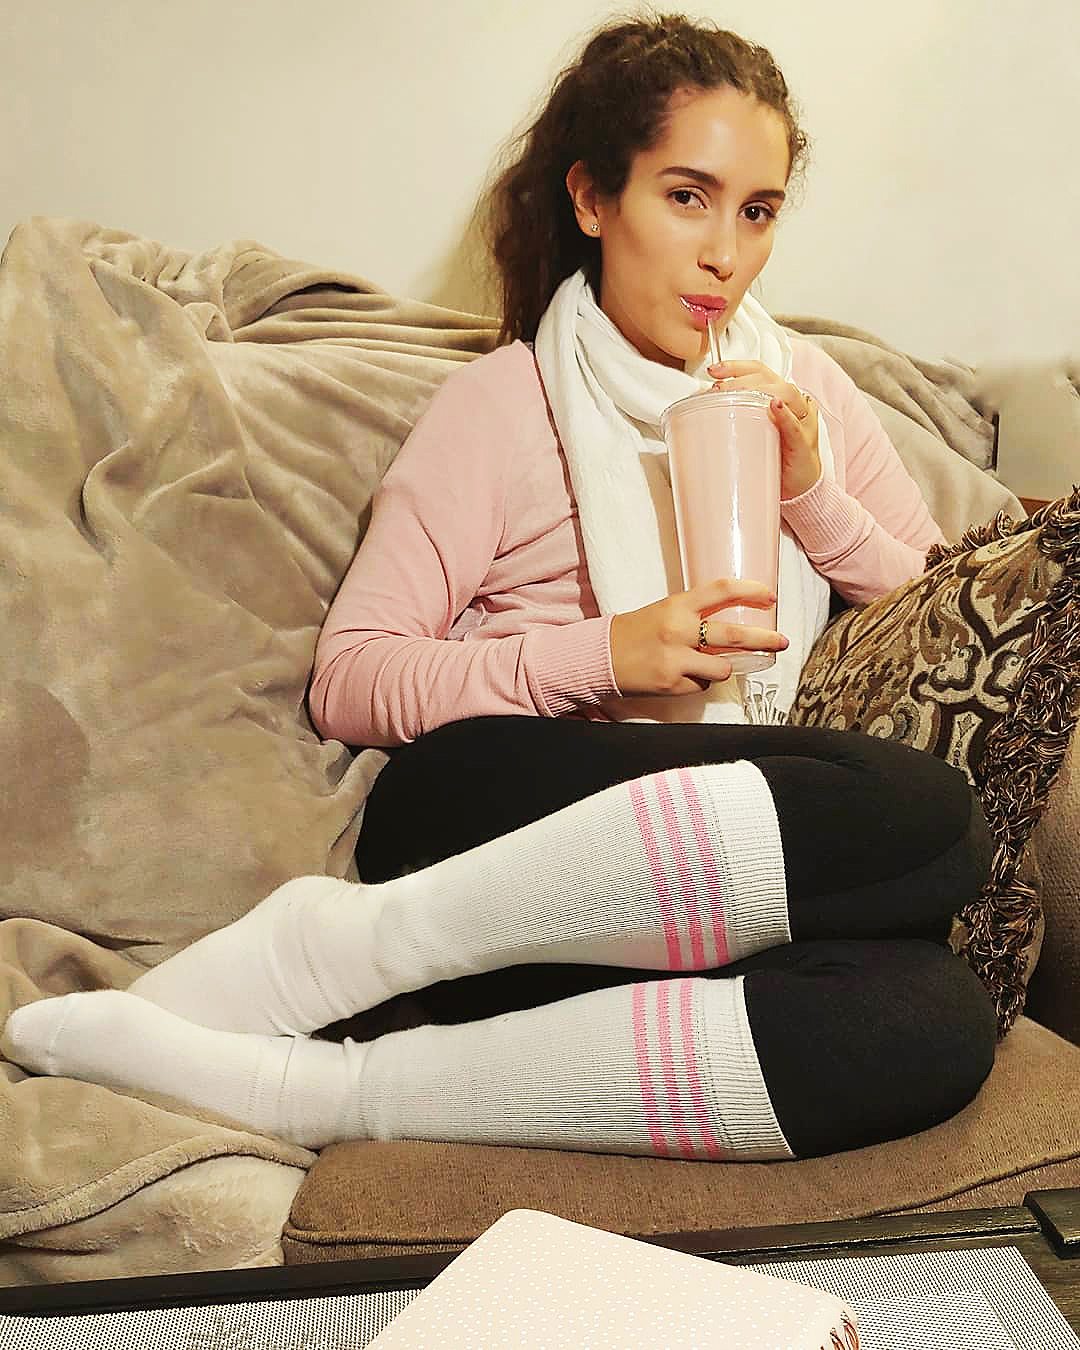 girl drinking a smoothie while sitting on the couch in leggings, long sleeve shirt, scarf and pink tube socks